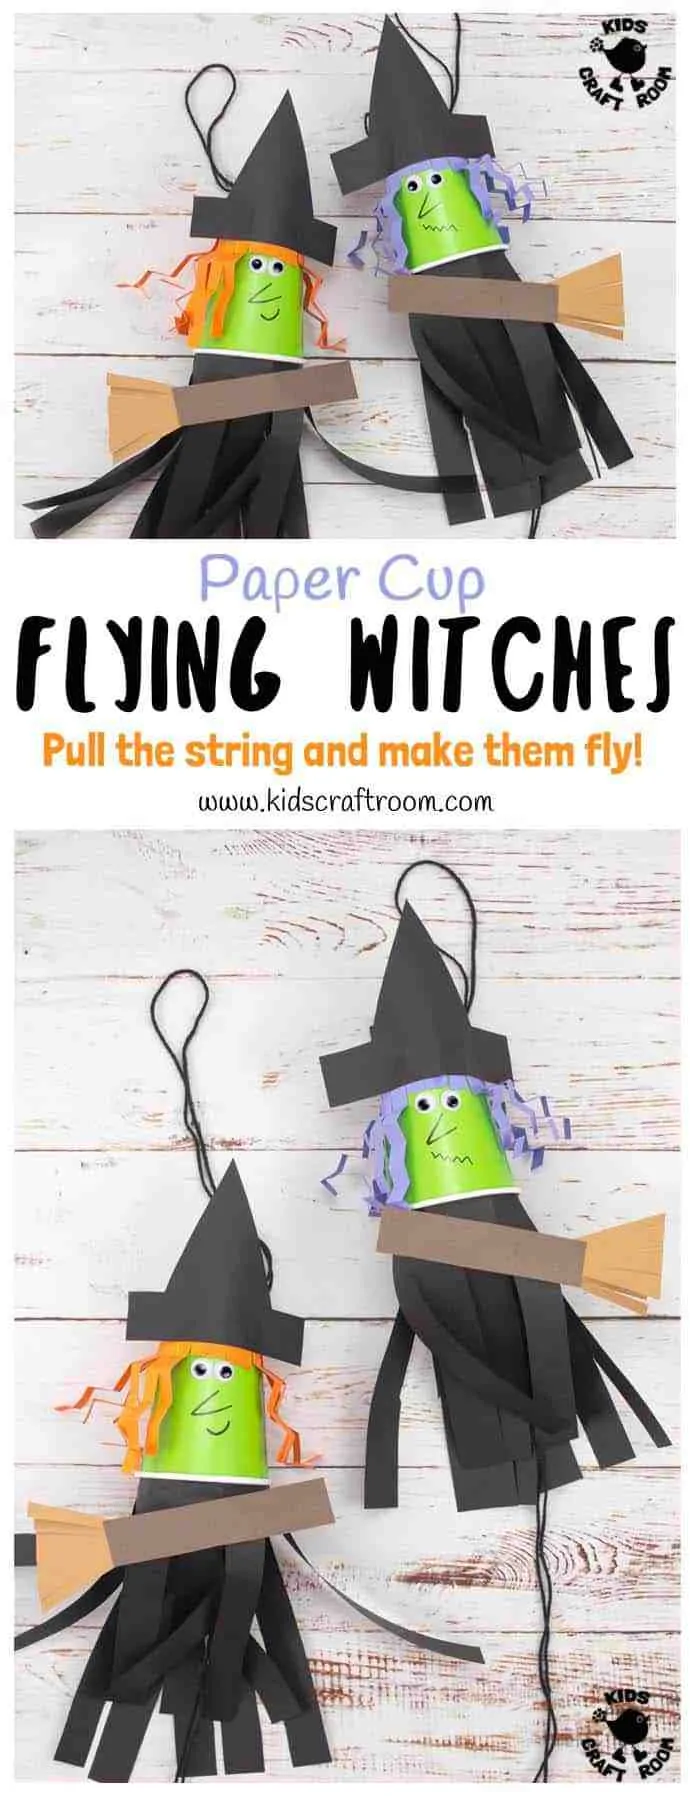 Four Flying Paper Cup Witch Craft For Kids. The faces are made from paper cups. They have strips of black paper stuck inside and hanging down to make the dresses. There is orange and purple paper hair and a black paper hat.